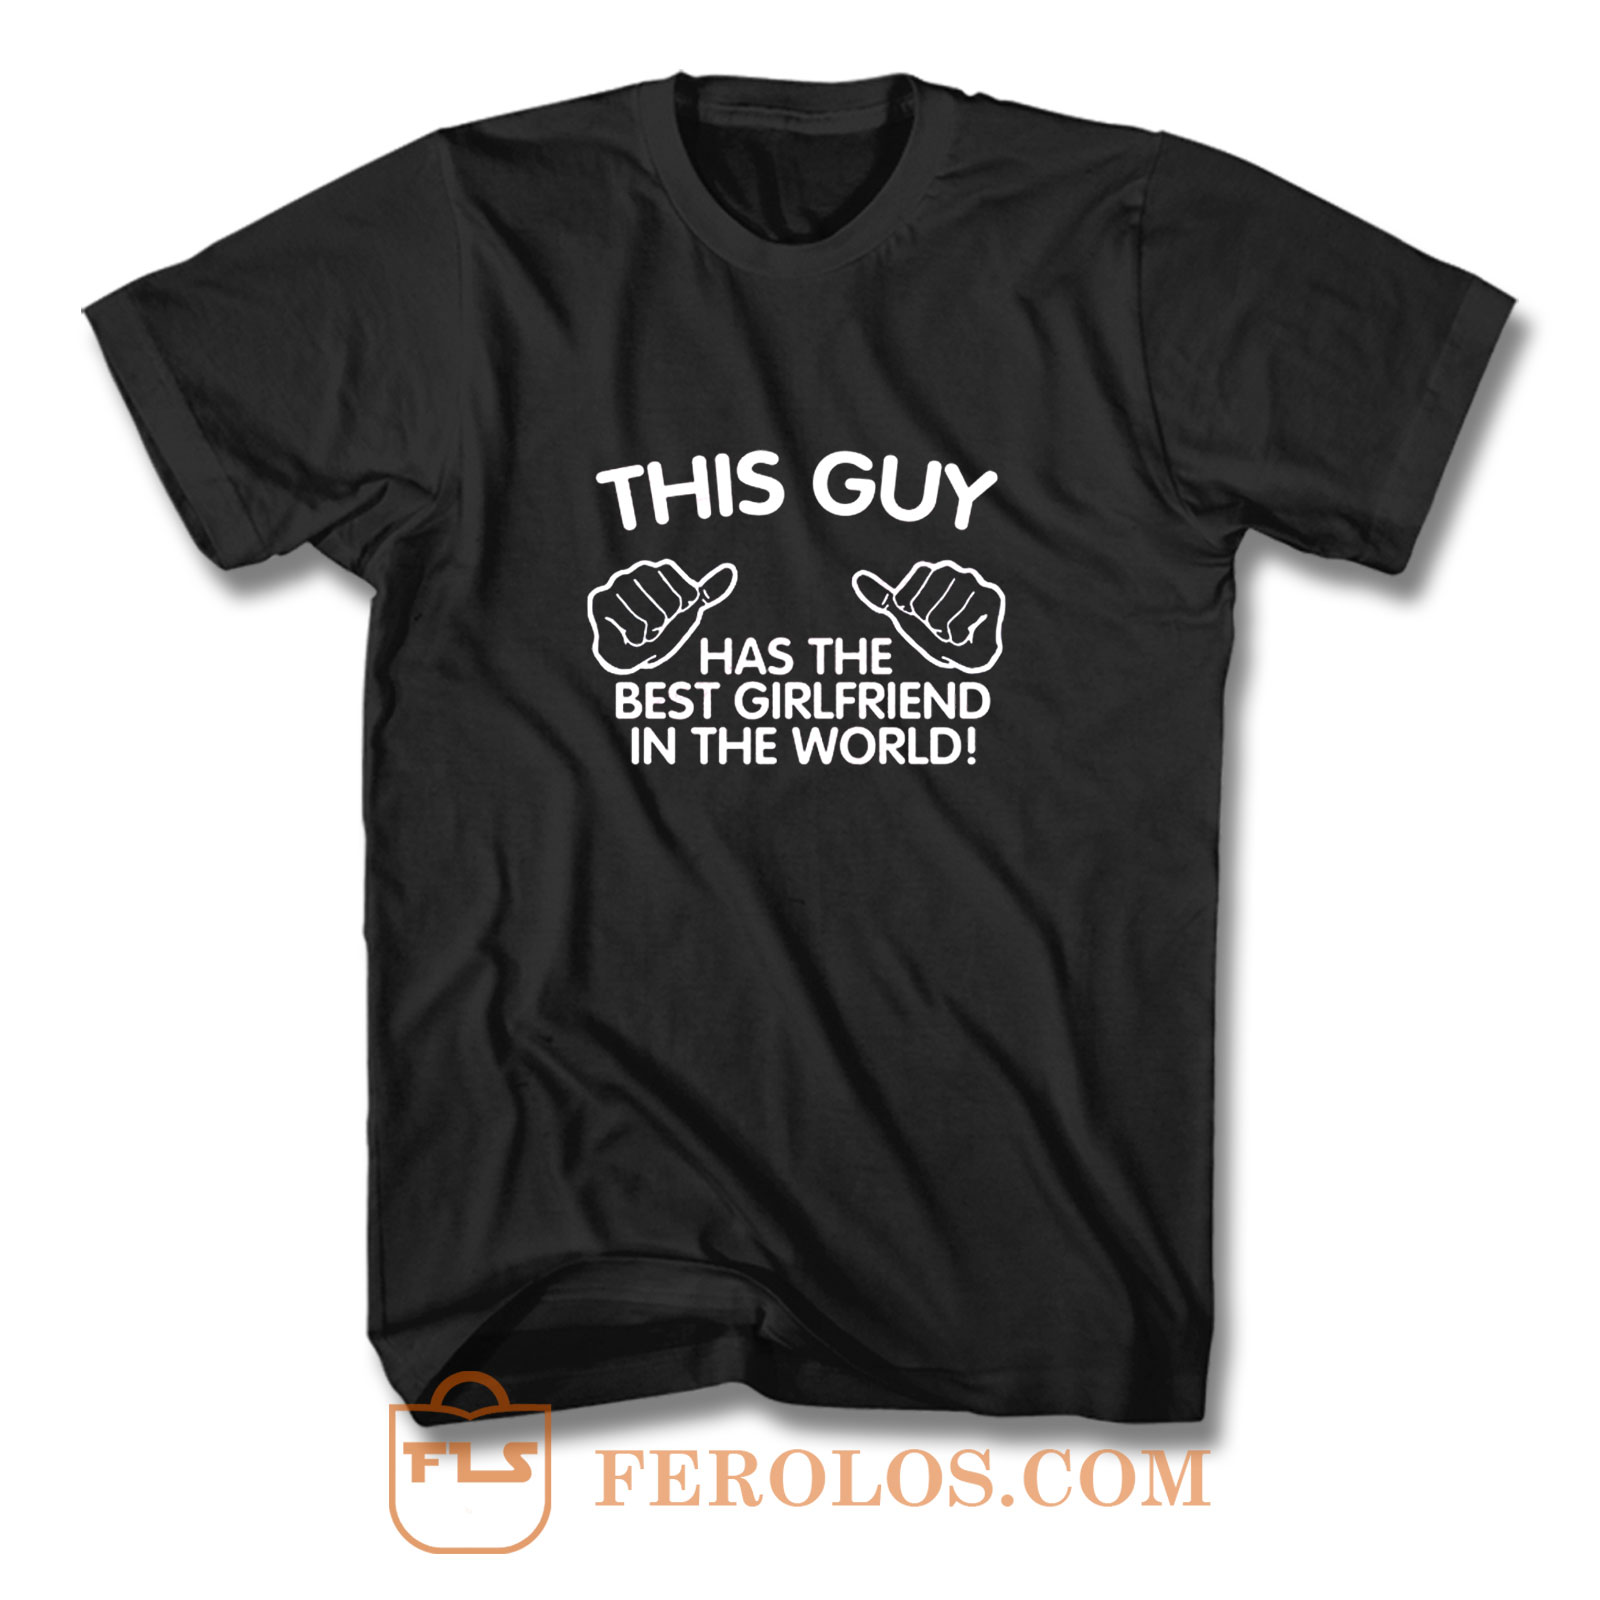 This Guy Has The Best Girlfriend In The World T Shirt | FEROLOS.COM